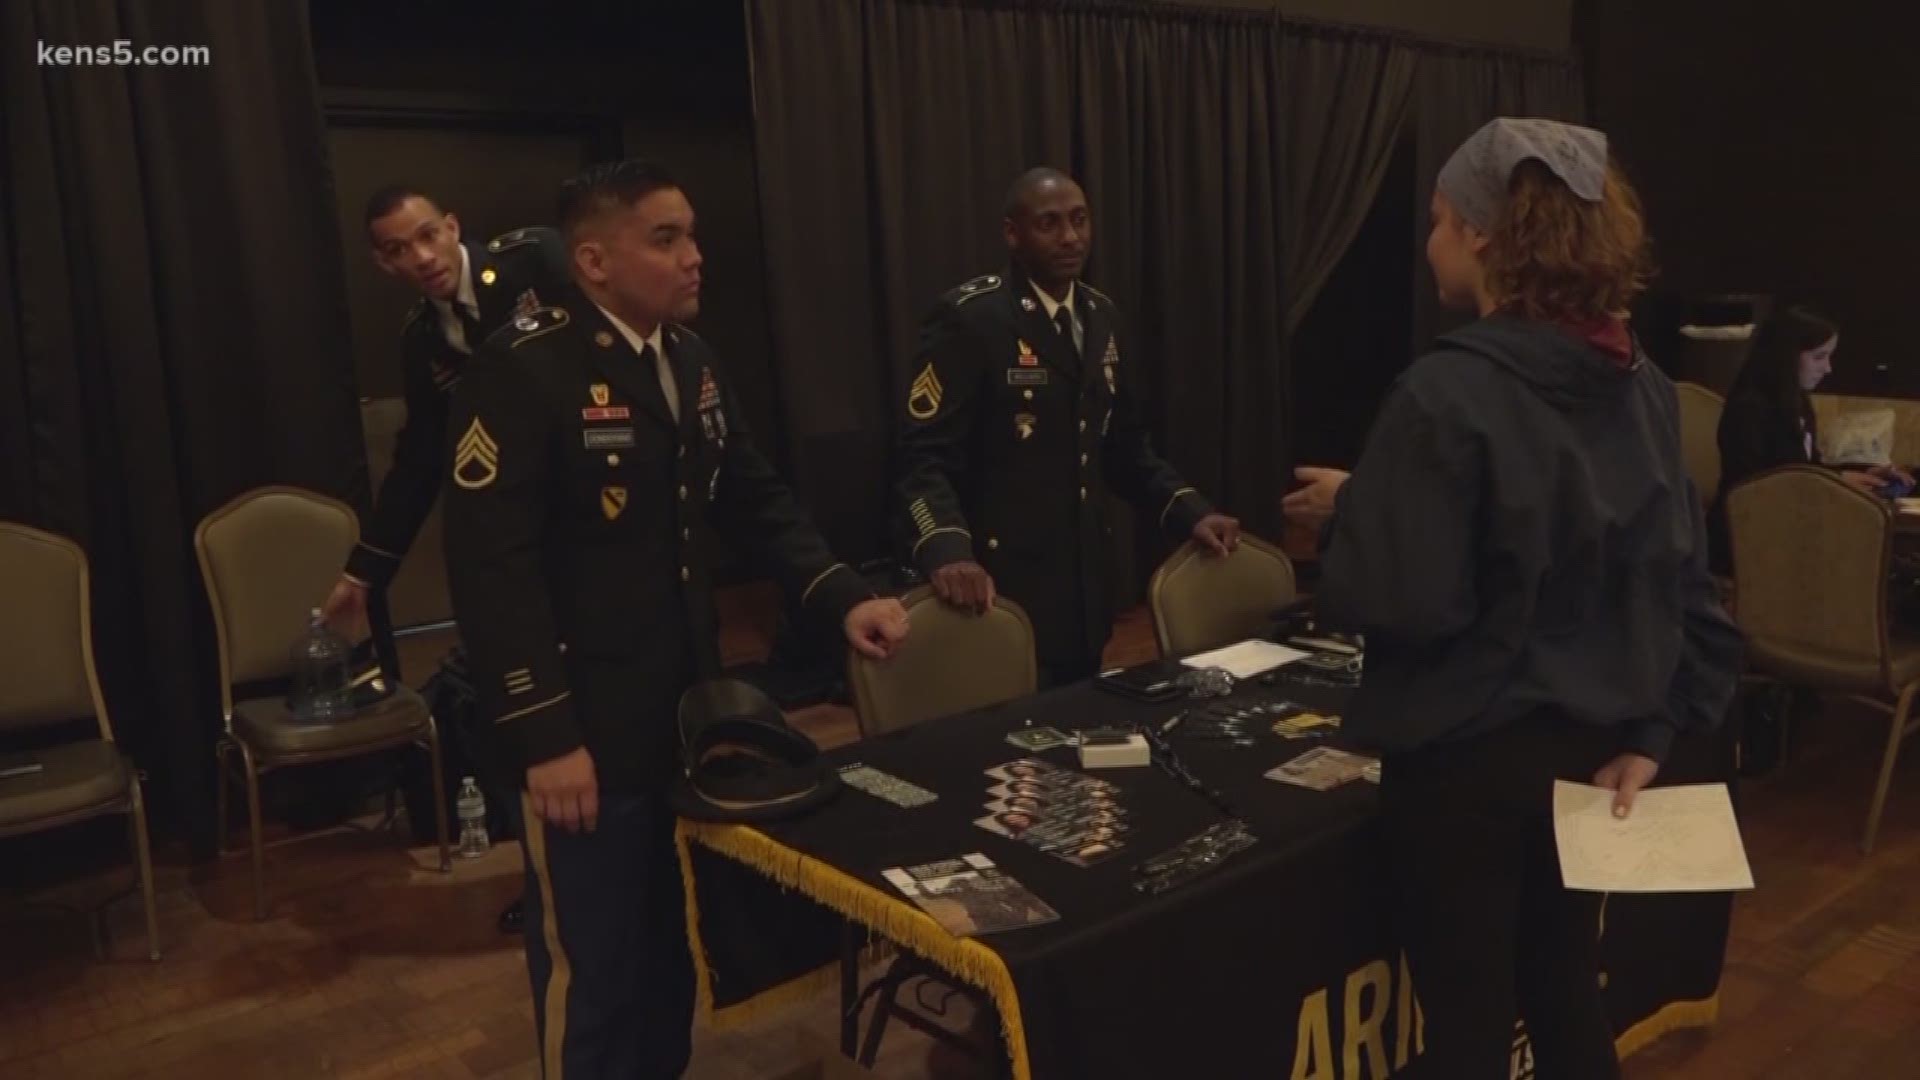 80 high school students from around our area got a chance to explore the UTSA campus today. They did it with soldiers and cadets from the army's ROTC program. Eyewitness News reporter Priya Sridhar reports.